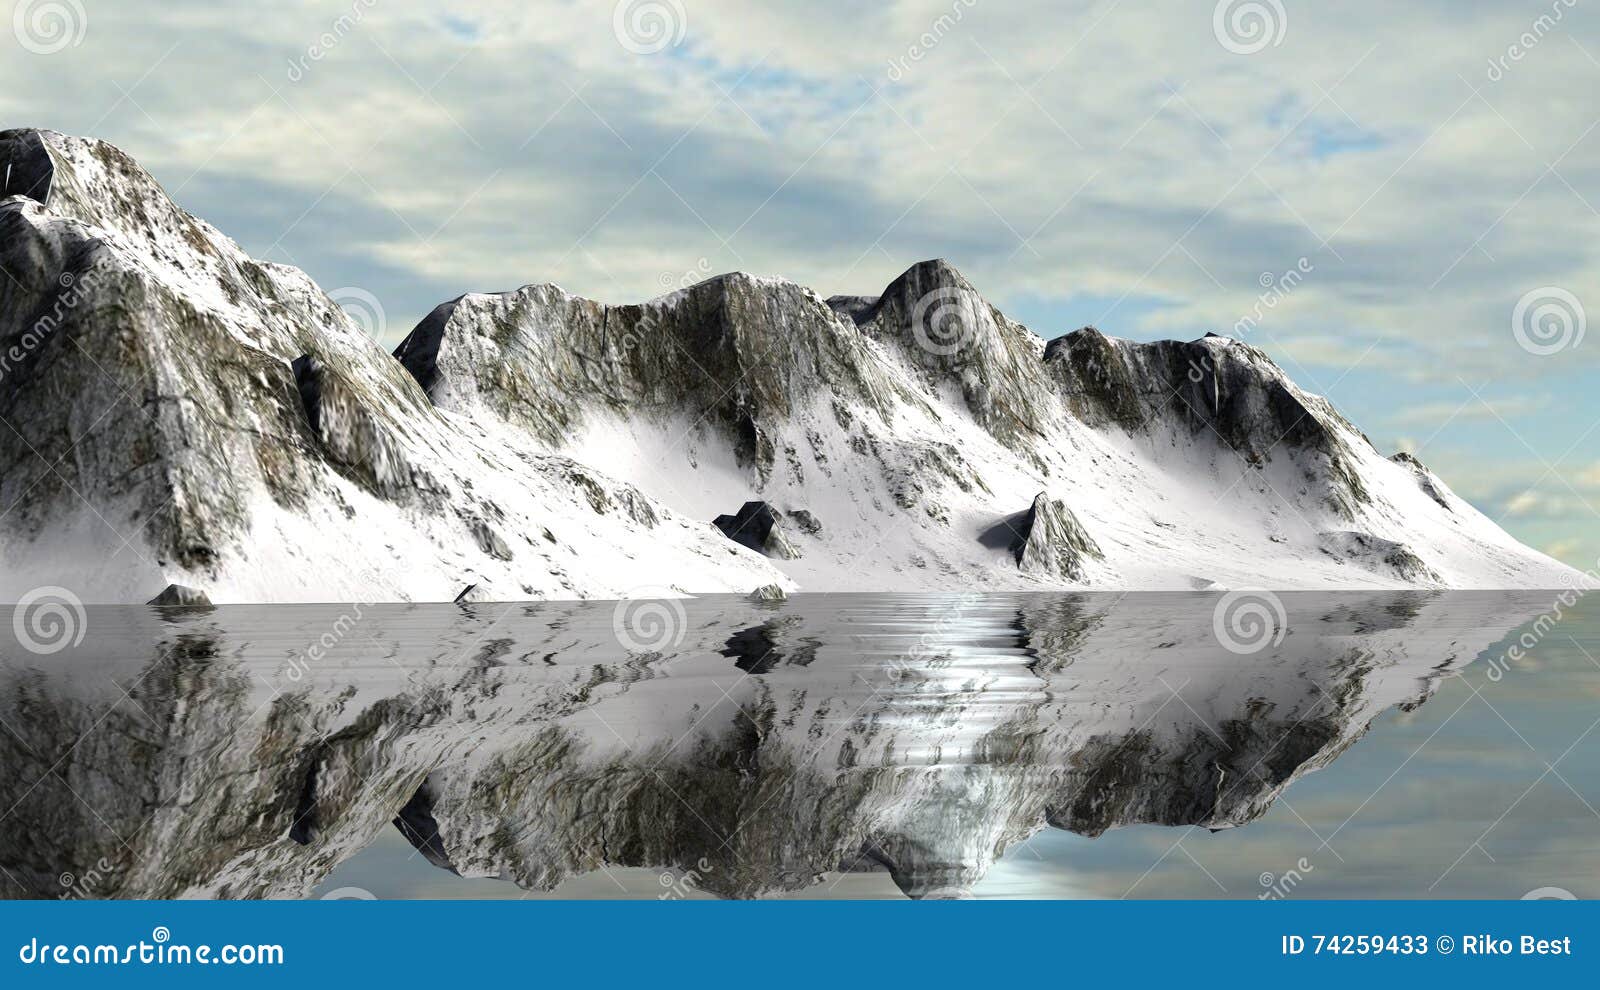 calm waters of a glacier lake with snowy mountains behin